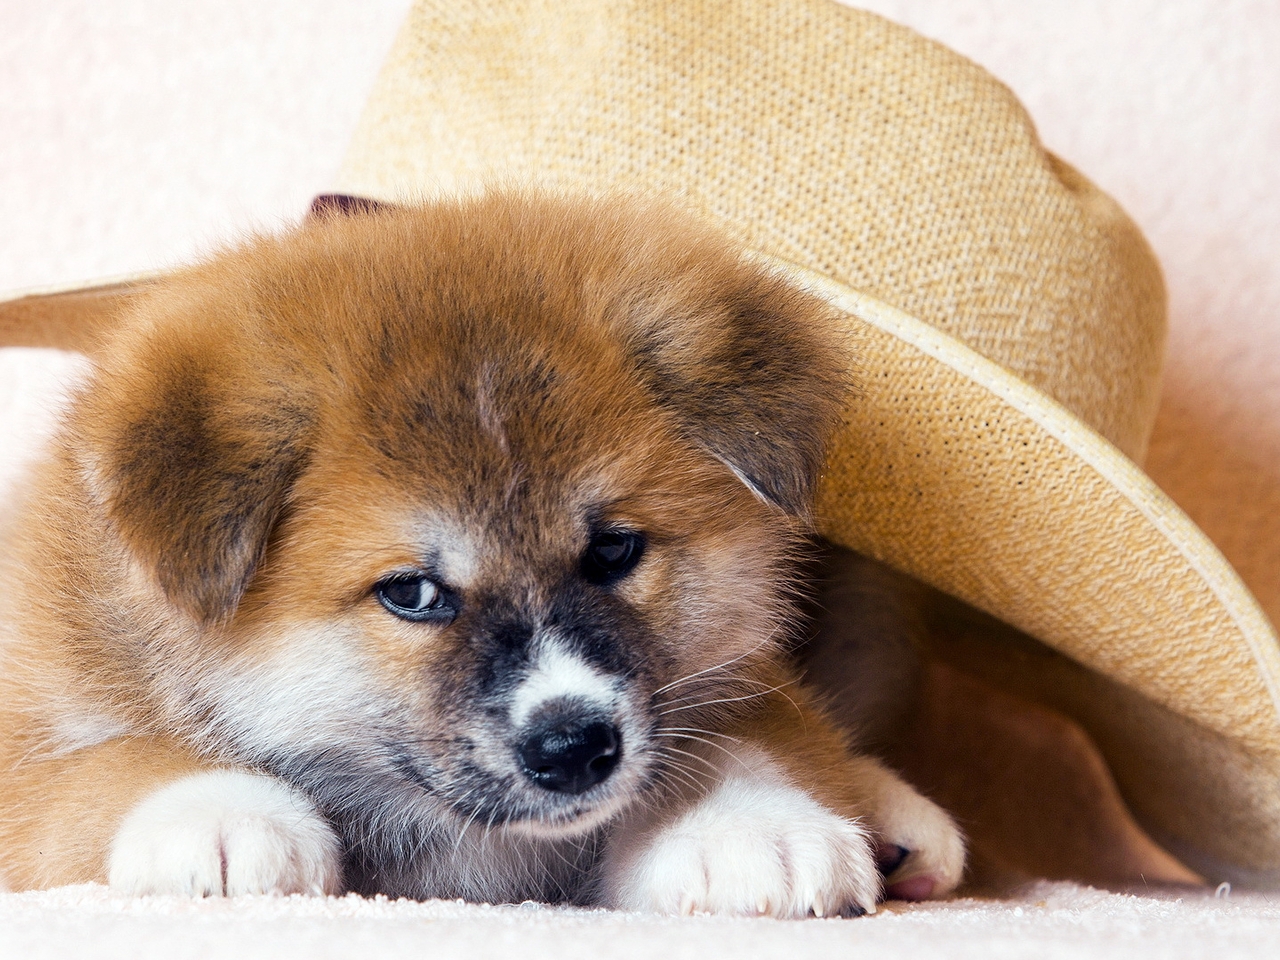 Image: Puppy, hat, face, ears, nose, eyes, paws, fur, Wallpaper